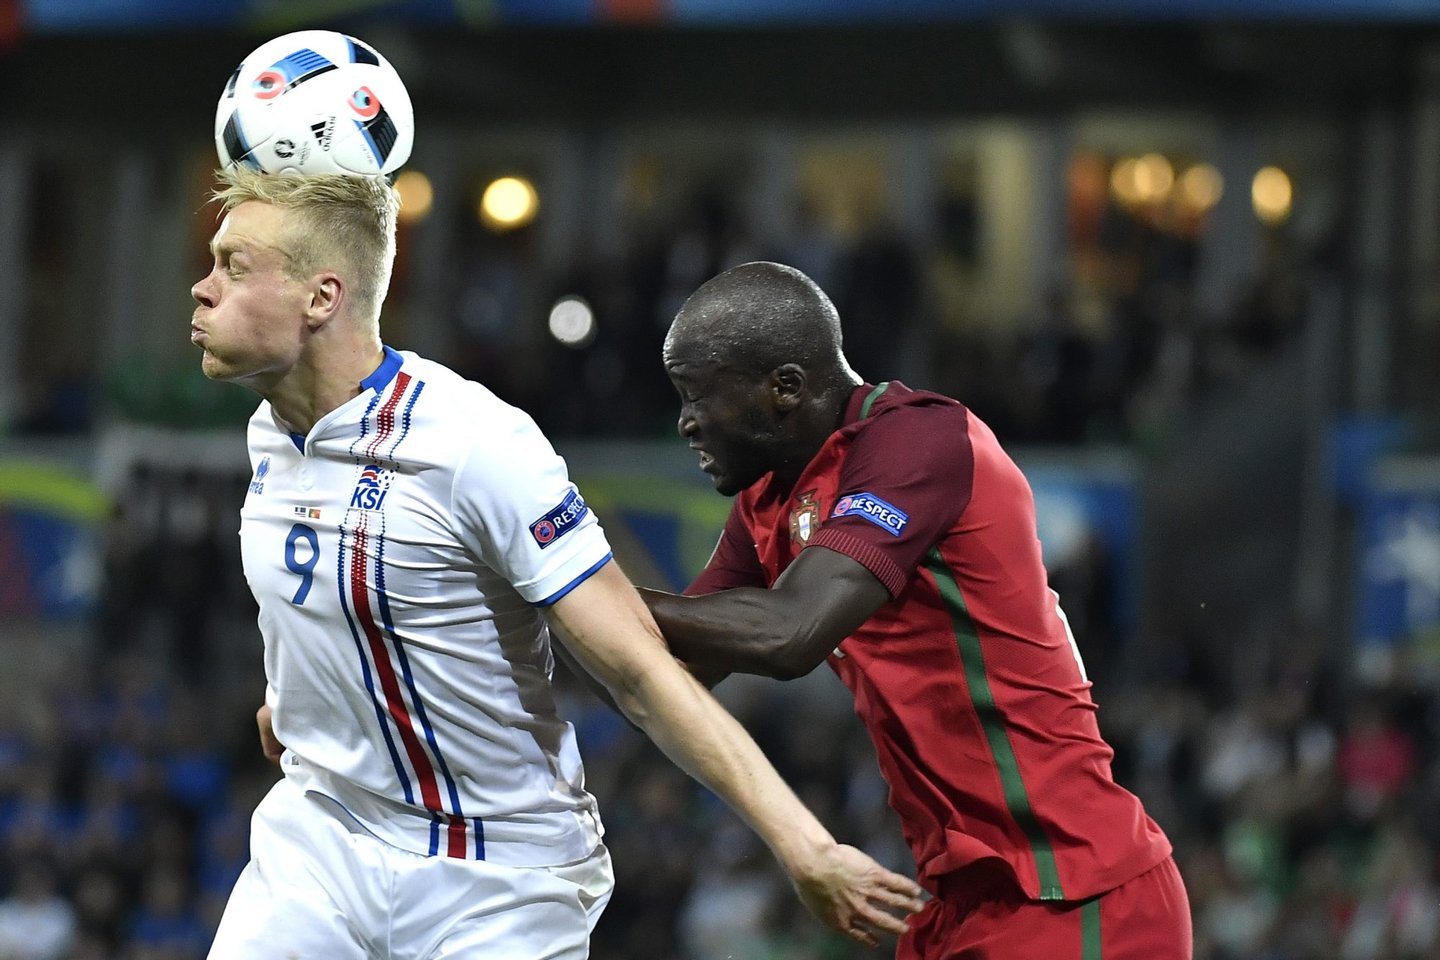 Iceland's forward Kolbeinn Sigthorsson is tackled by Portugal's midfielder Danilo Pereira during the Euro 2016 group F football match between Portugal and Iceland at the Geoffroy-Guichard stadium in Saint-Etienne on June 14, 2016. / AFP / jeff pachoud (Photo credit should read JEFF PACHOUD/AFP/Getty Images)